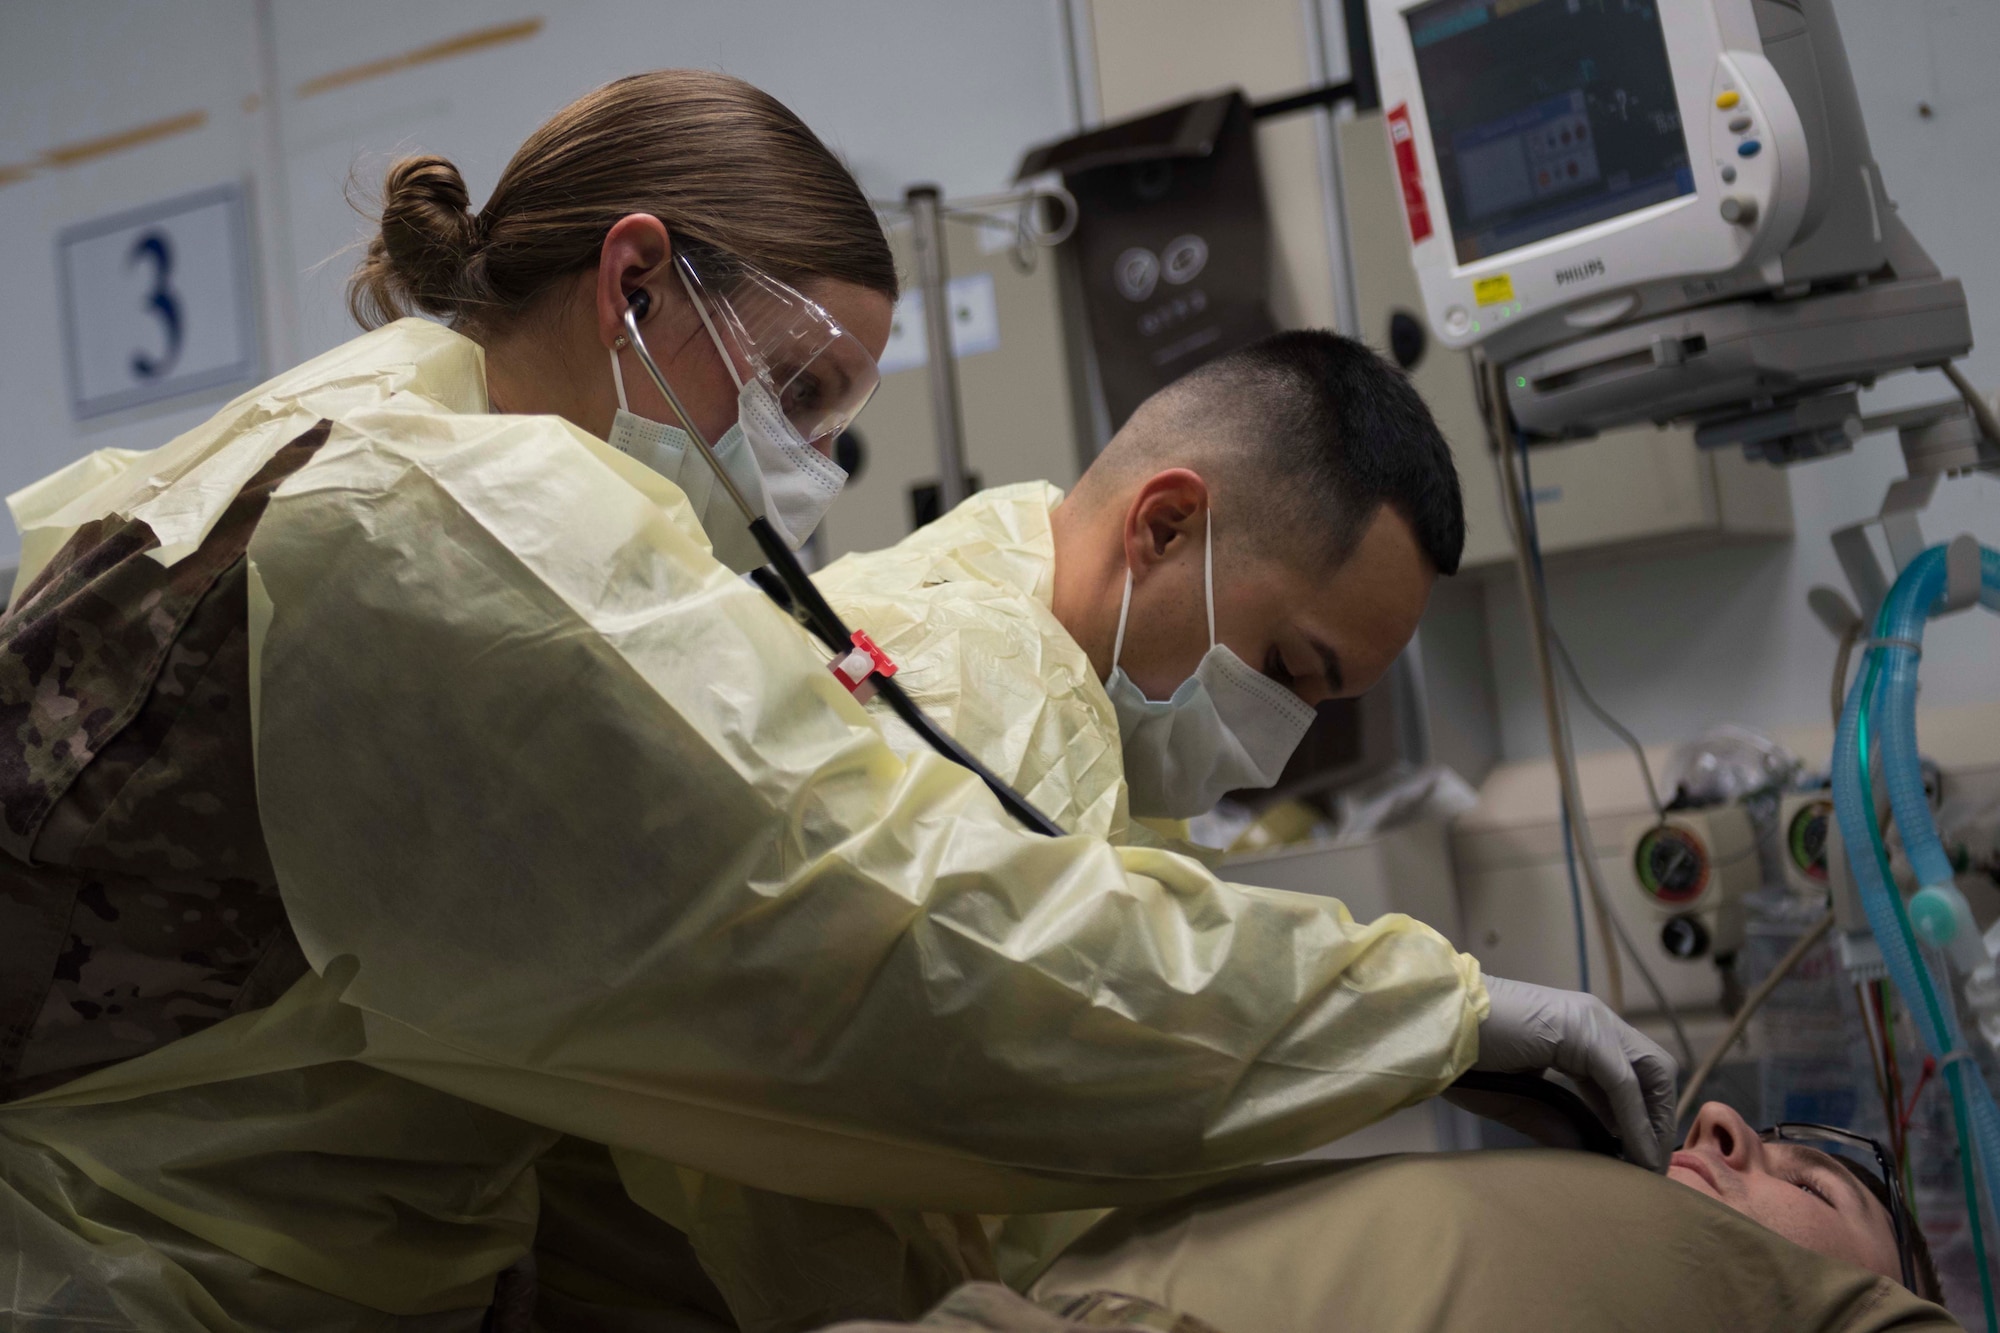 The 455th EMDG is the medical component of Task Force Medical-Afghanistan, providing combat medical services and support to U.S. and coalition forces throughout Afghanistan.